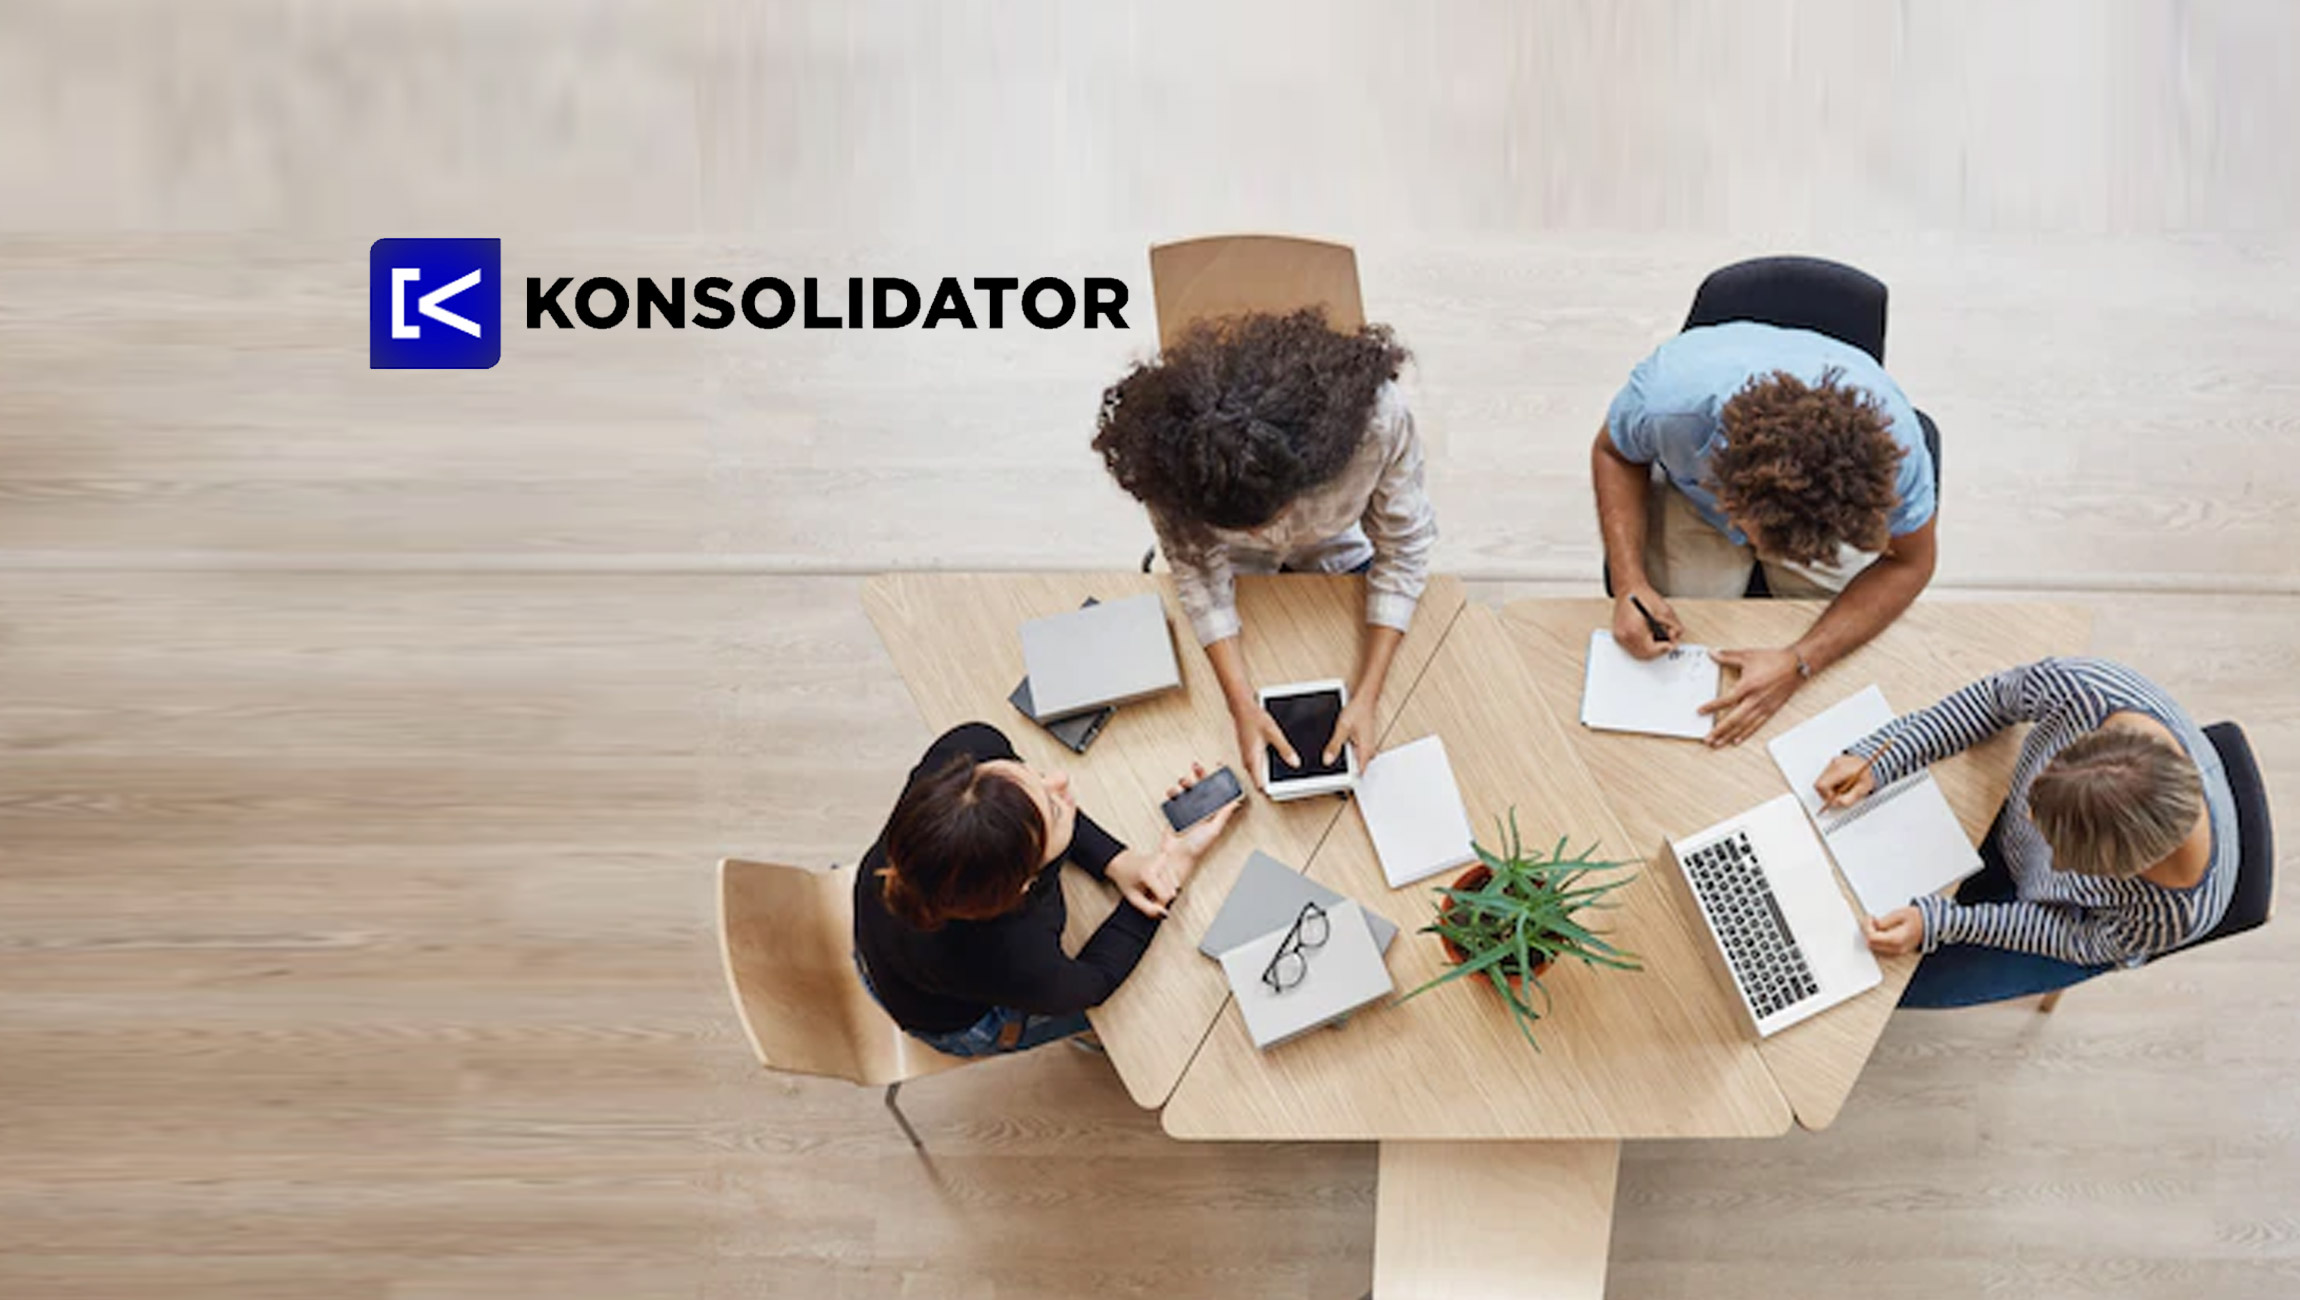 Konsolidator Signs Referral Partner Agreement With an Alliance of 21 Independent Companies